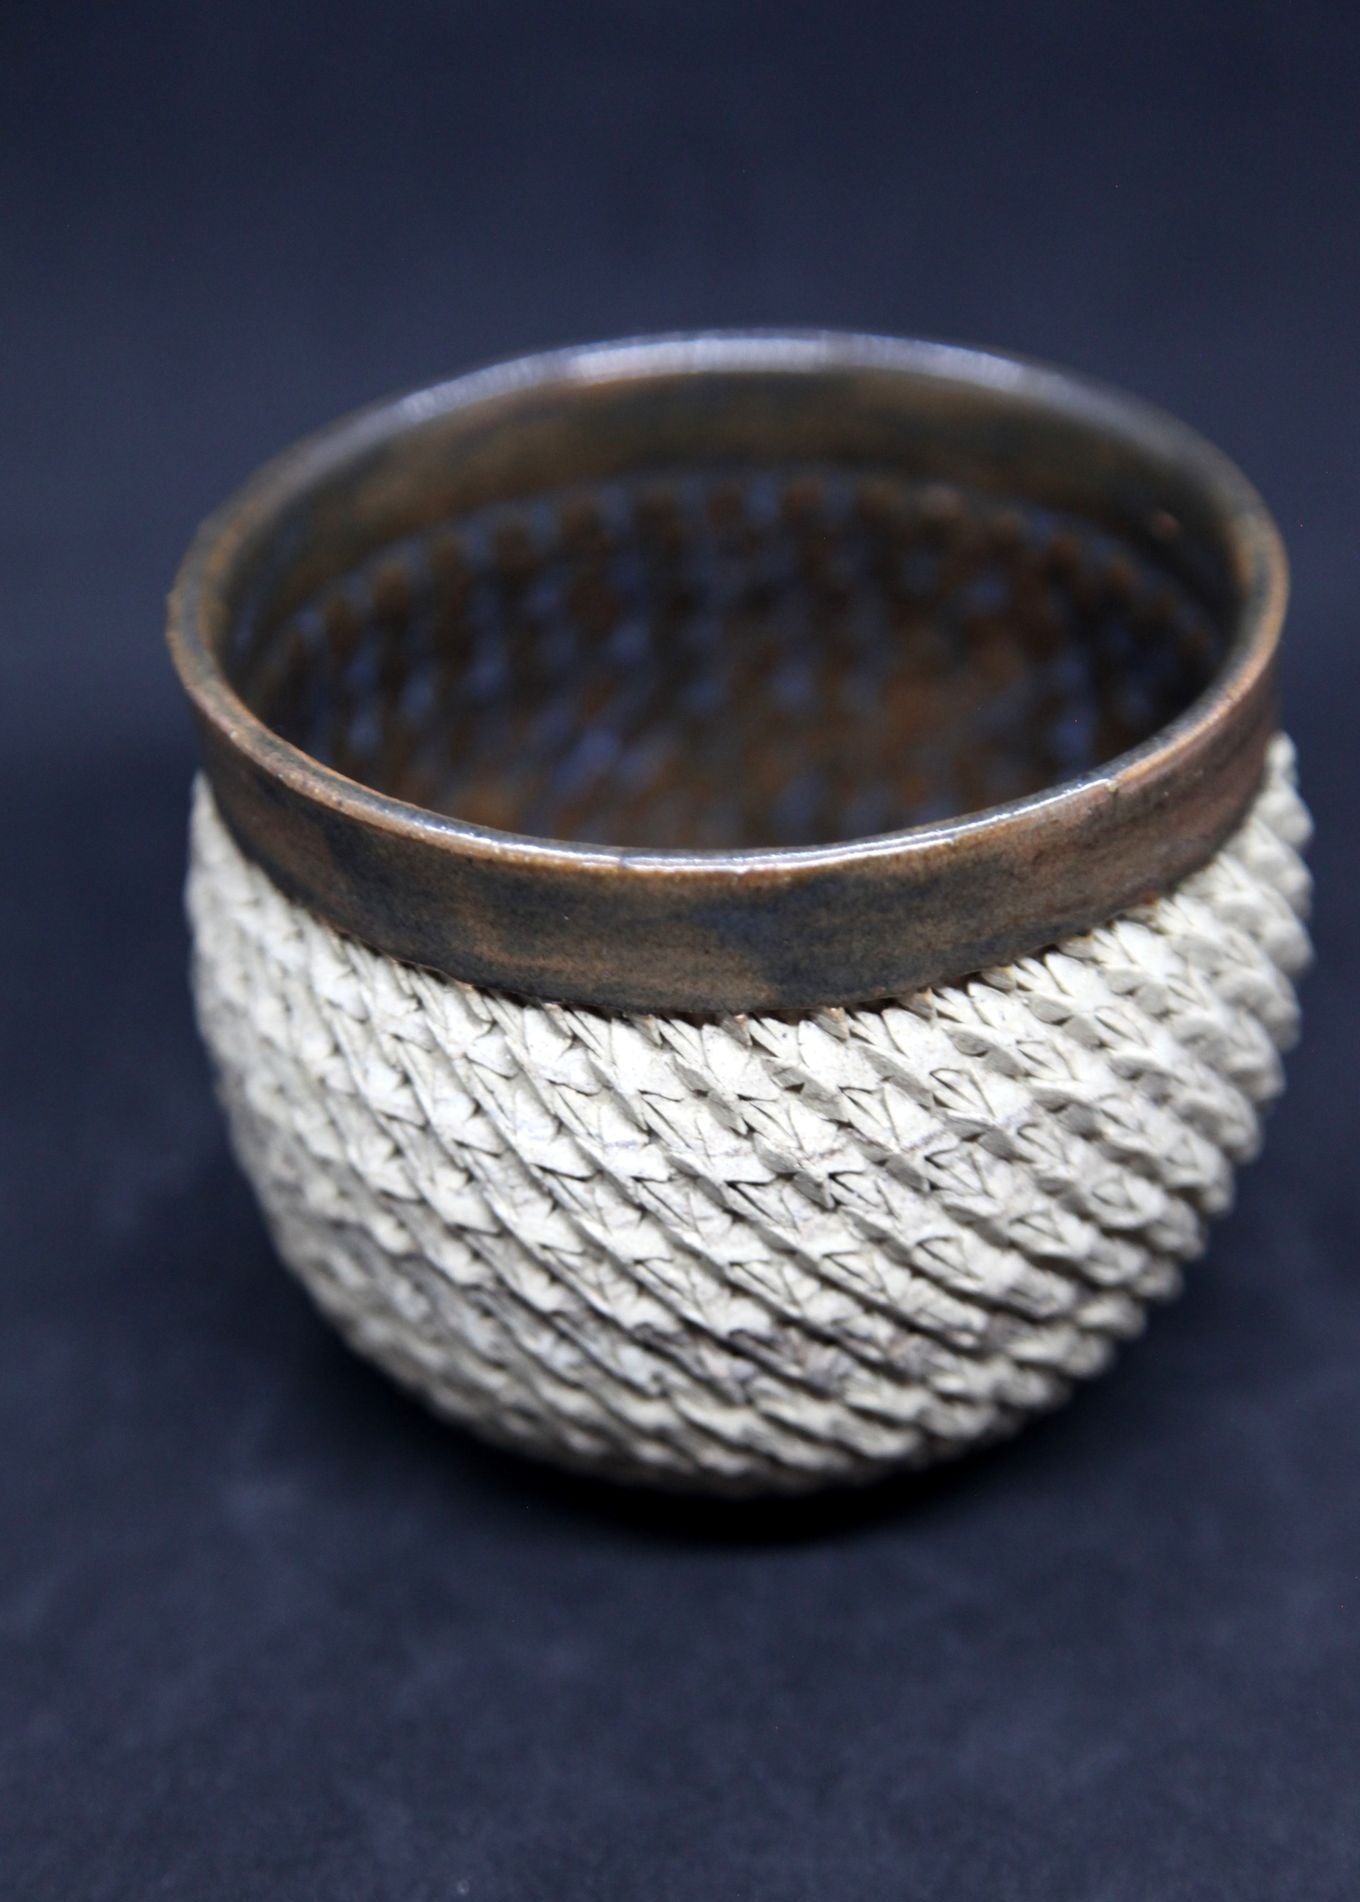 Brown and blue bowl on beige clay - braiding pattern